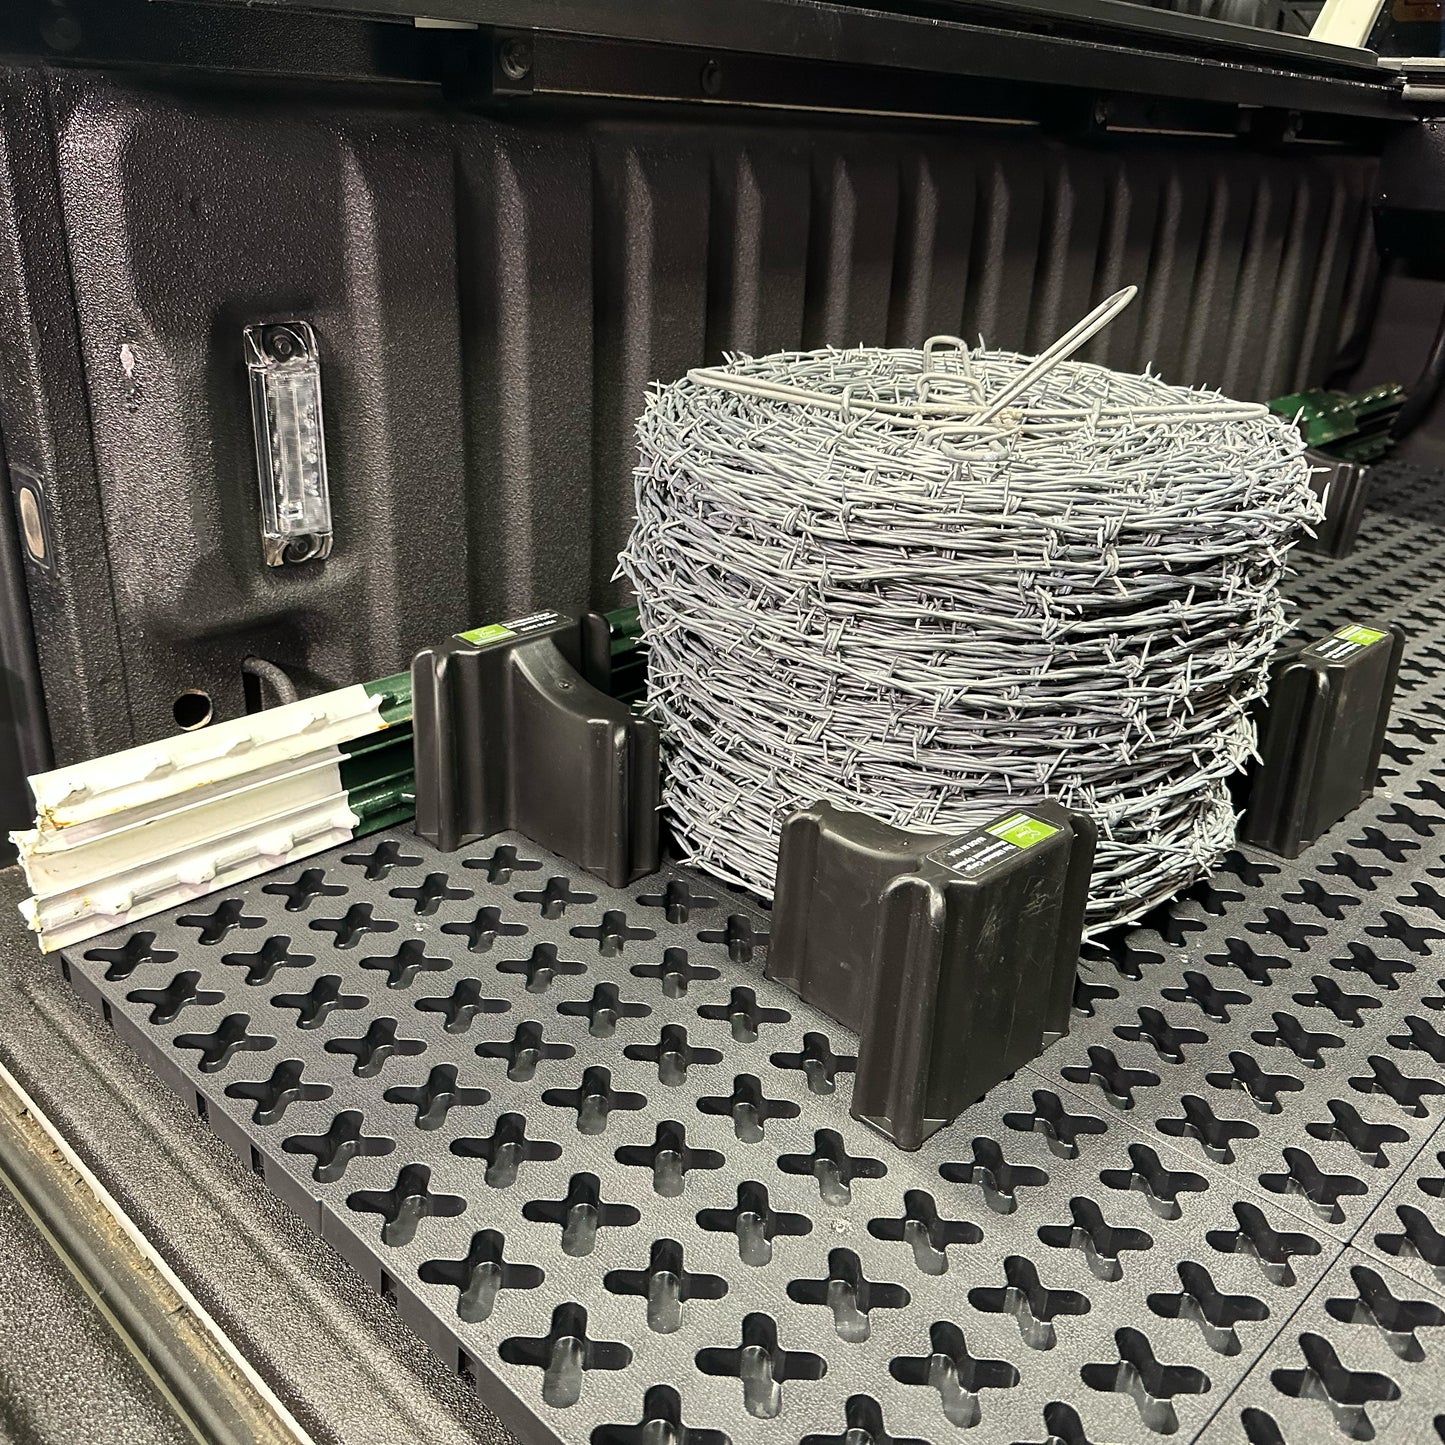 A spool of barb wire and t-posts secured in a truck bed.